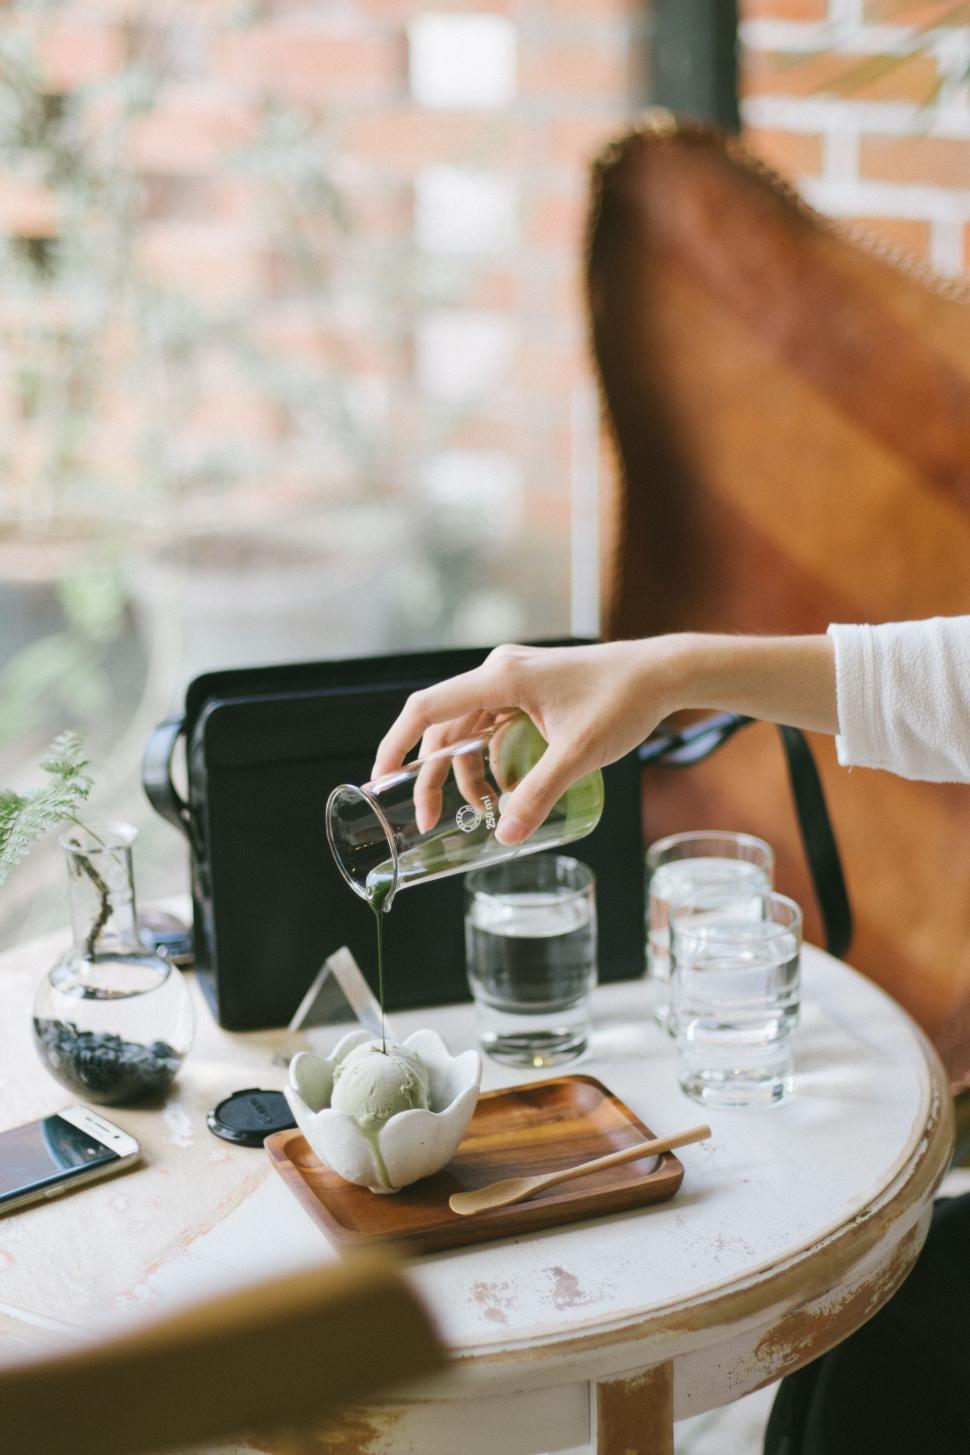 Free Image of Woman Pouring Drink at Table 